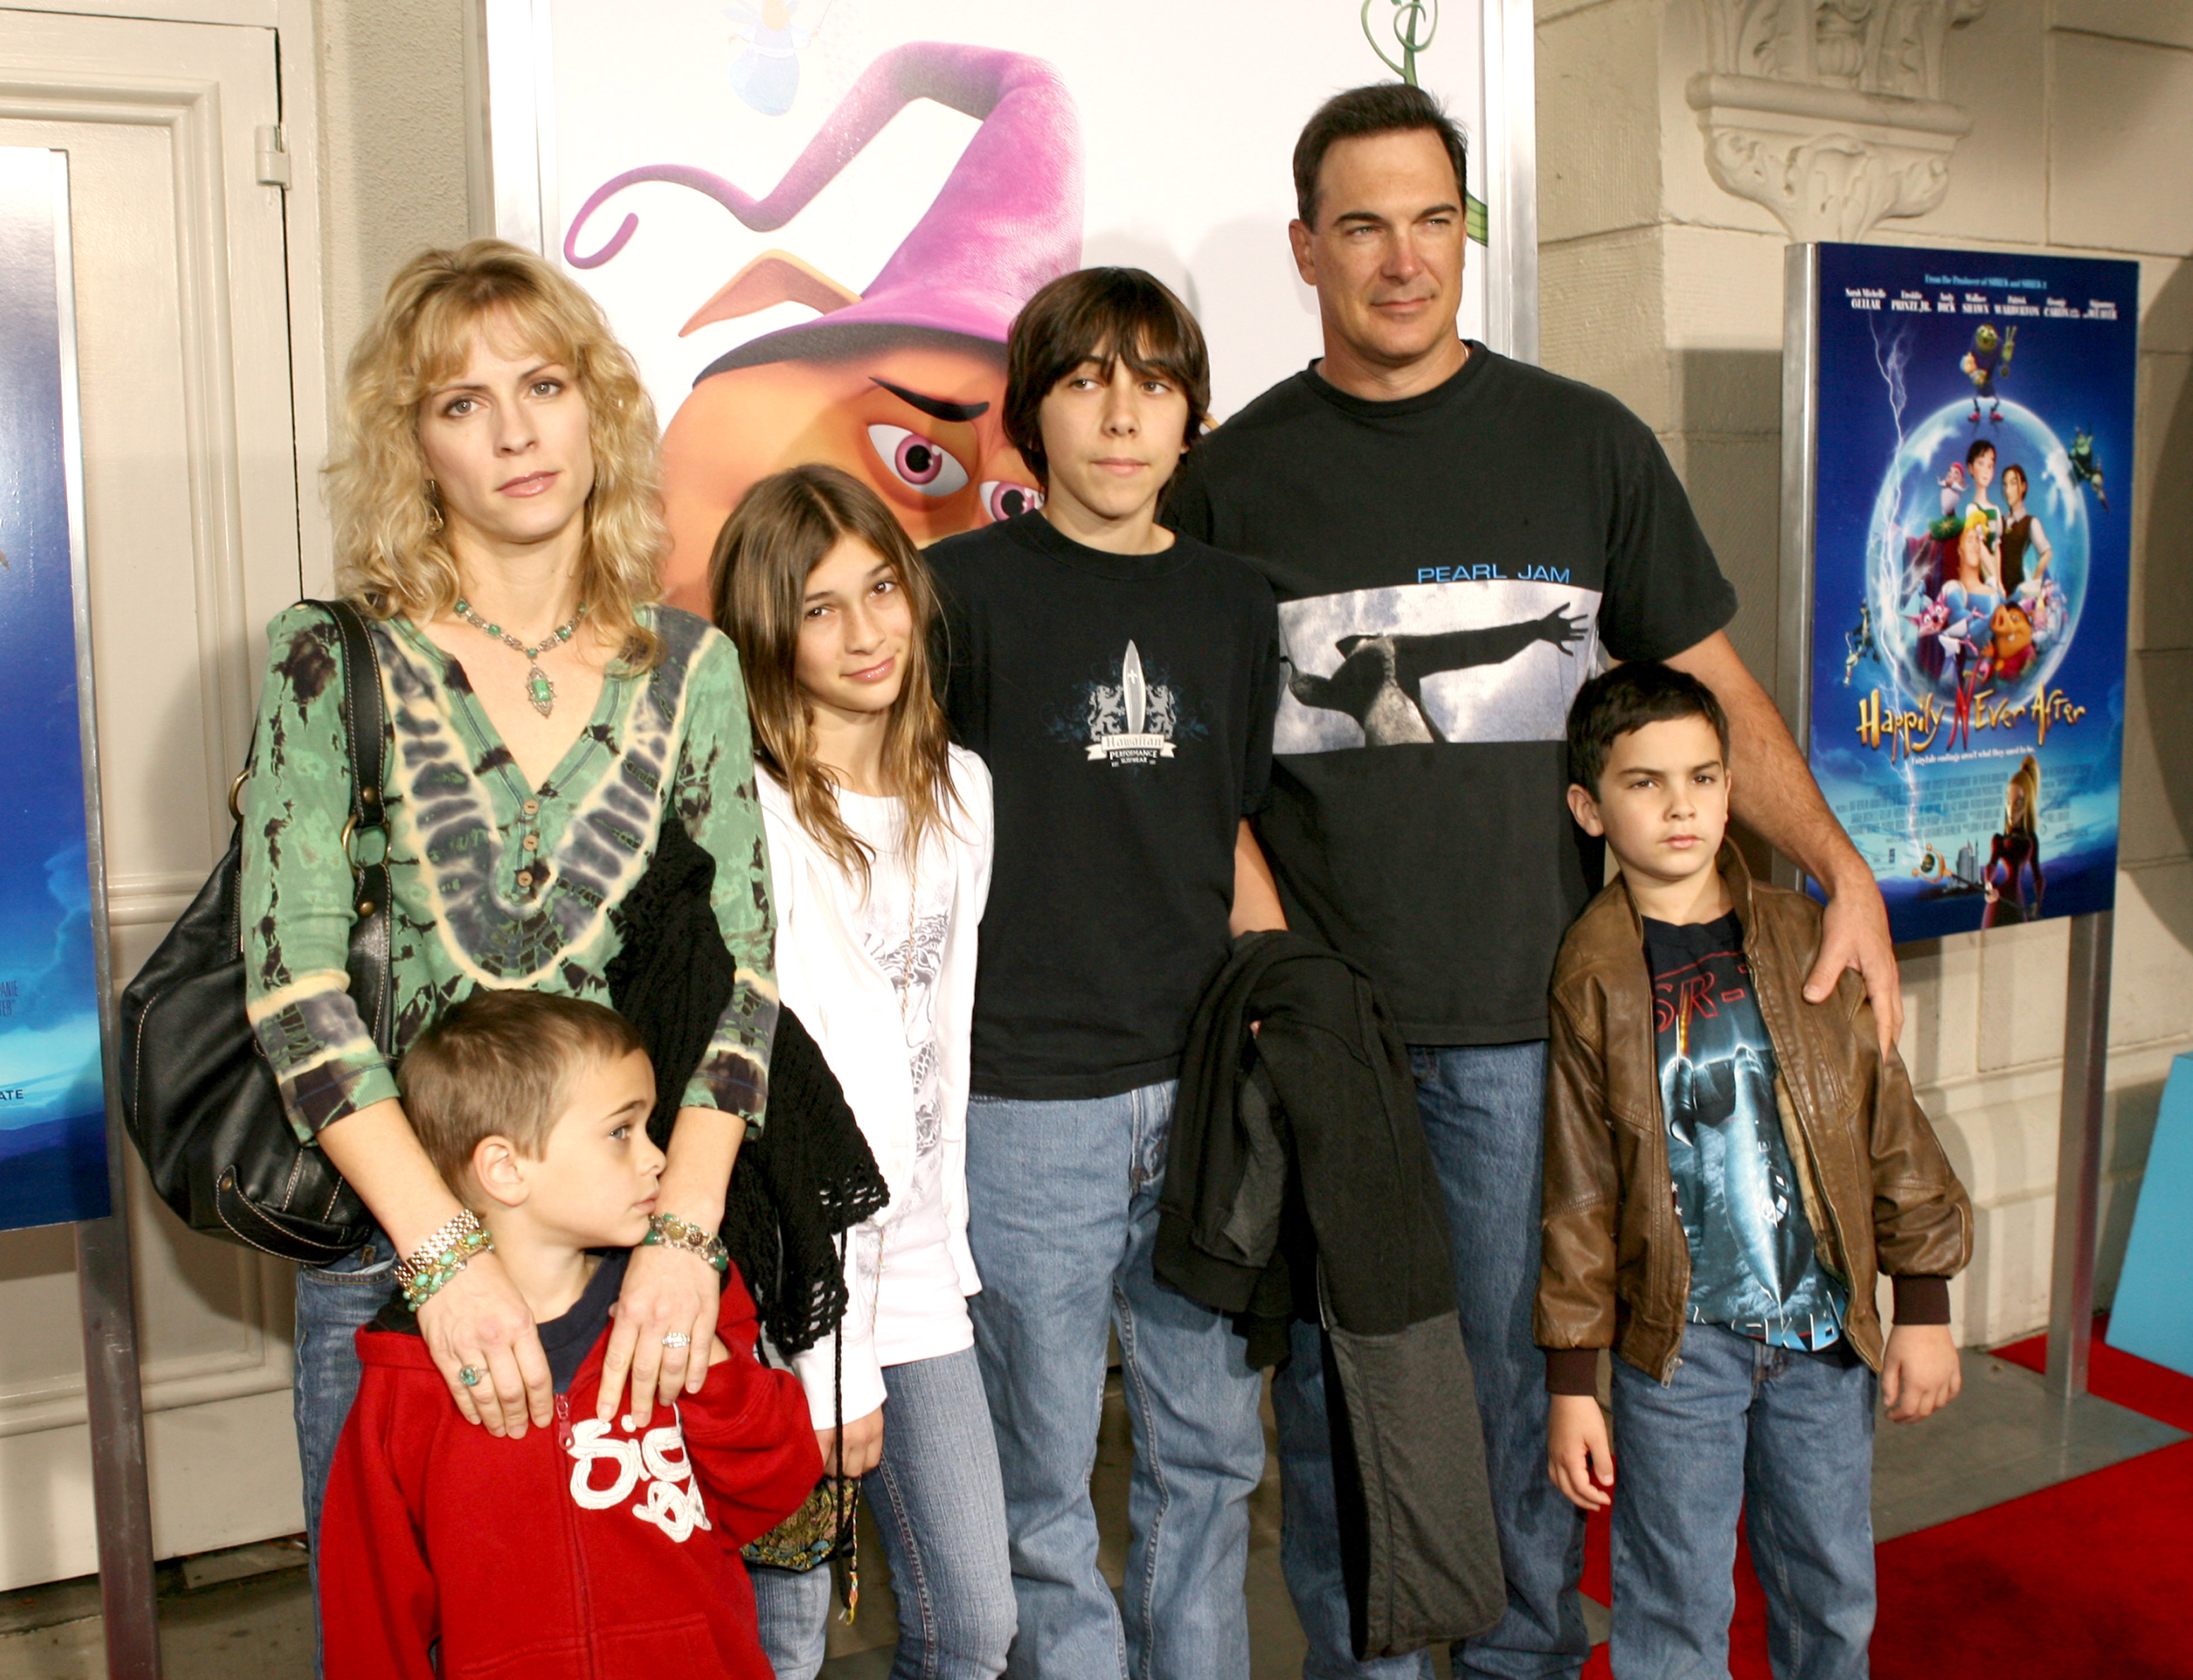 Actor Patrick Warburton and his wife and kids during "Happily Never After" Los Angeles Premiere at The Mann Festival Theater on December 16, 2006 in Westwood, California | Source: Getty Images